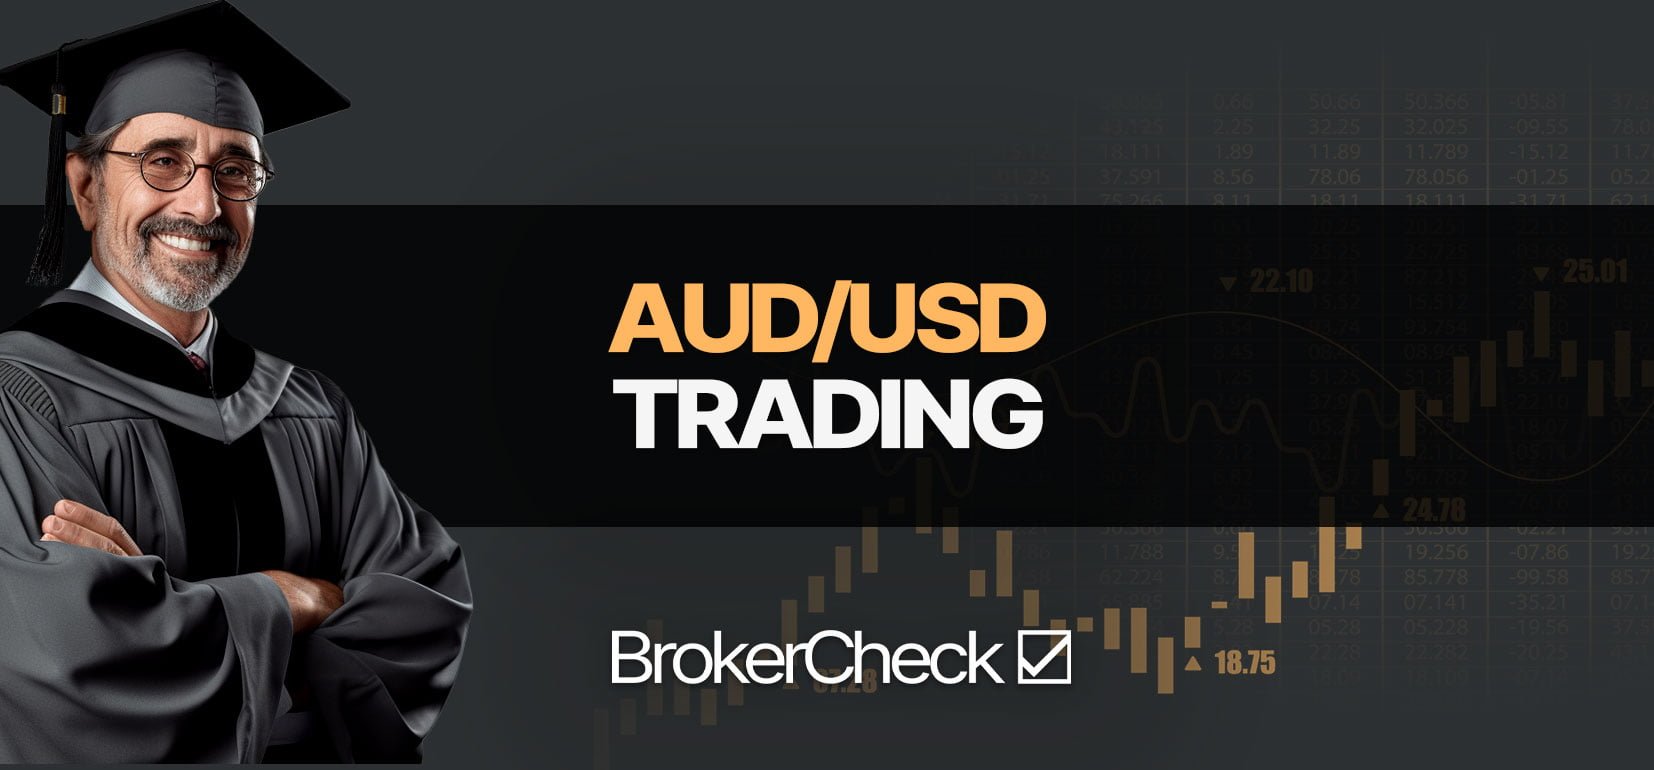 How To Trade AUD/USD 성공